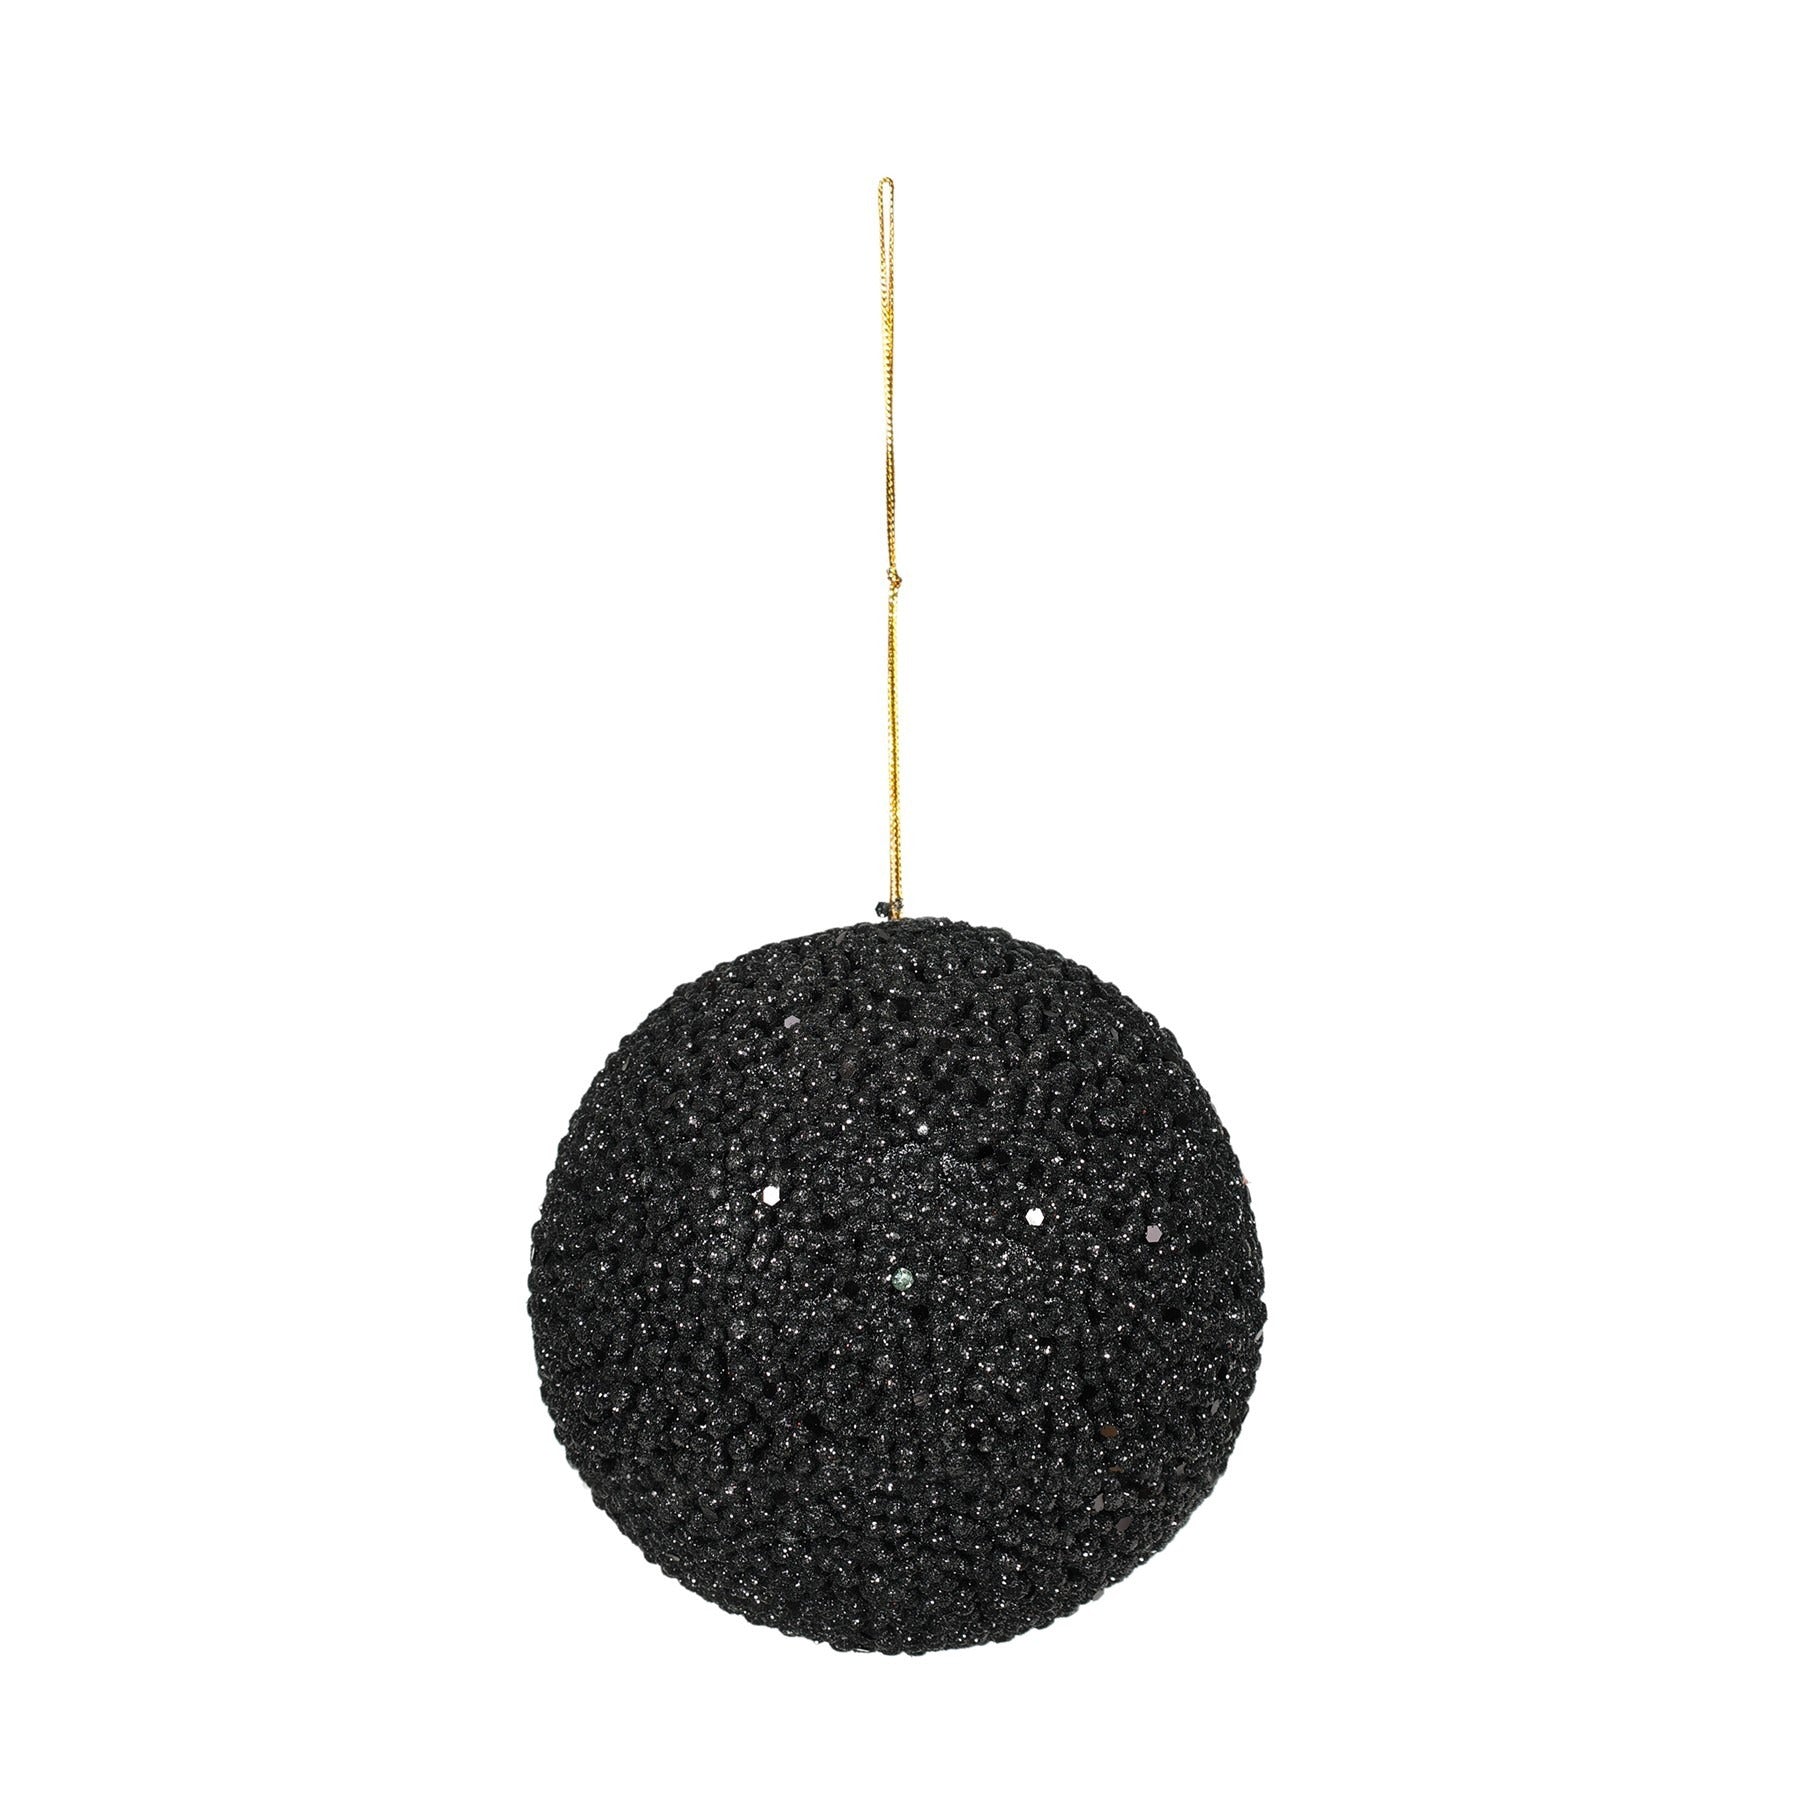 View Black Beaded Glitter Bauble Dia12cm information